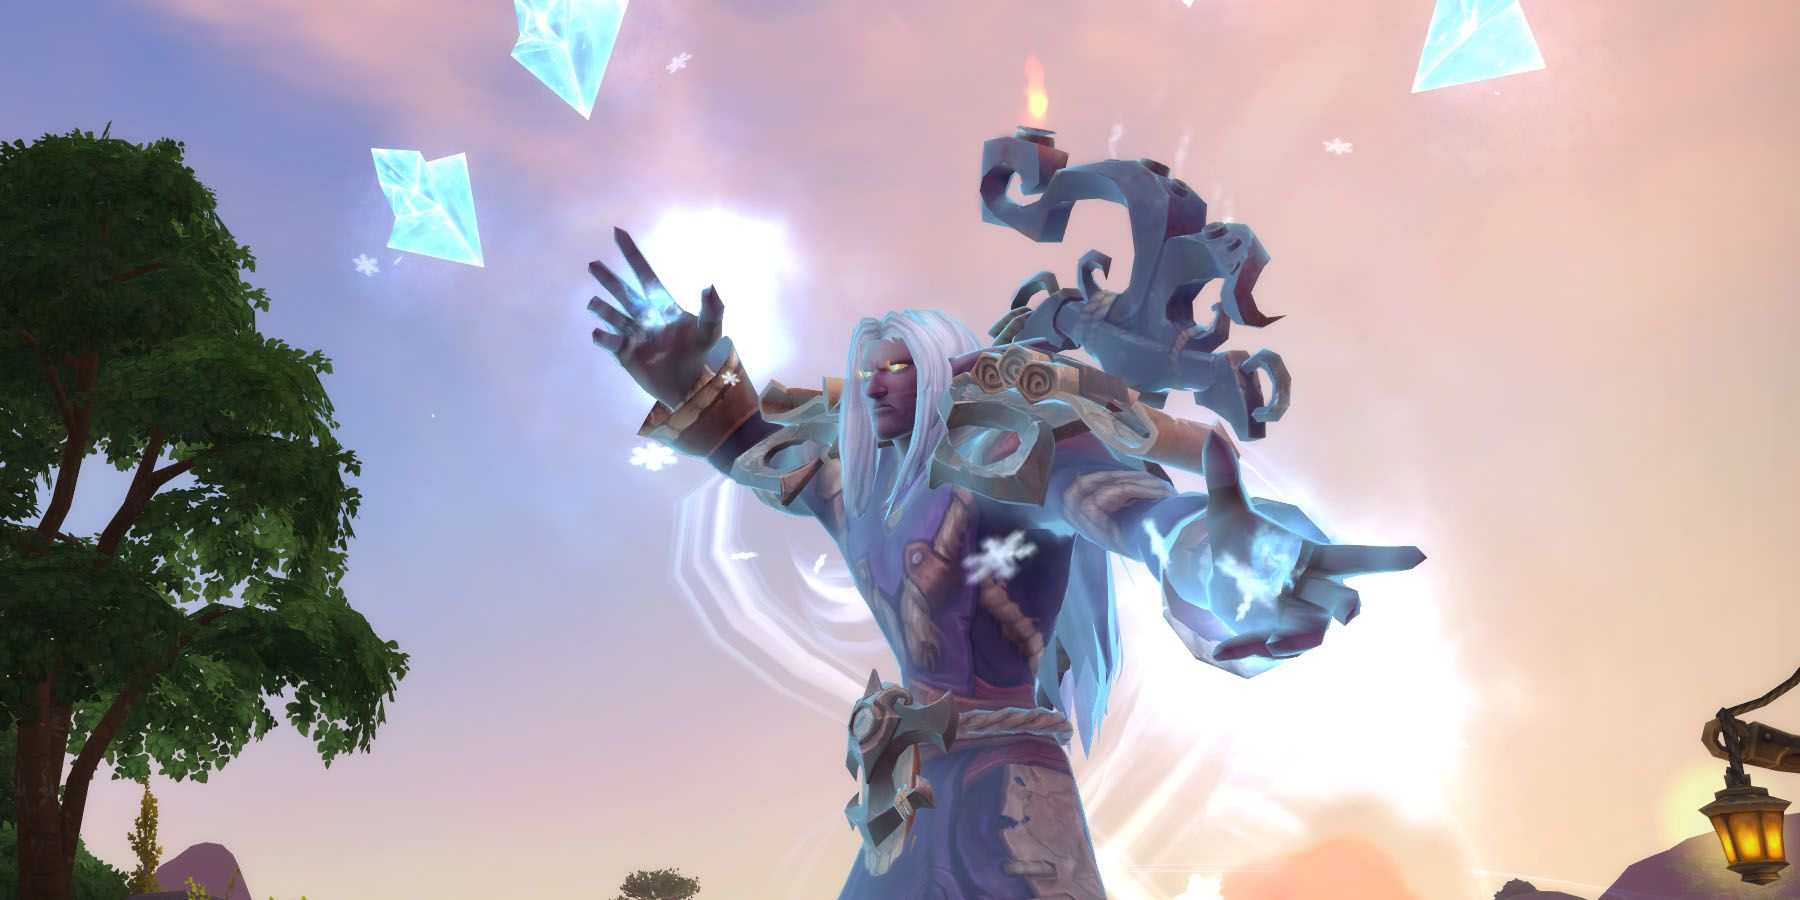 Mage in World of Warcraft Battle for Azeroth